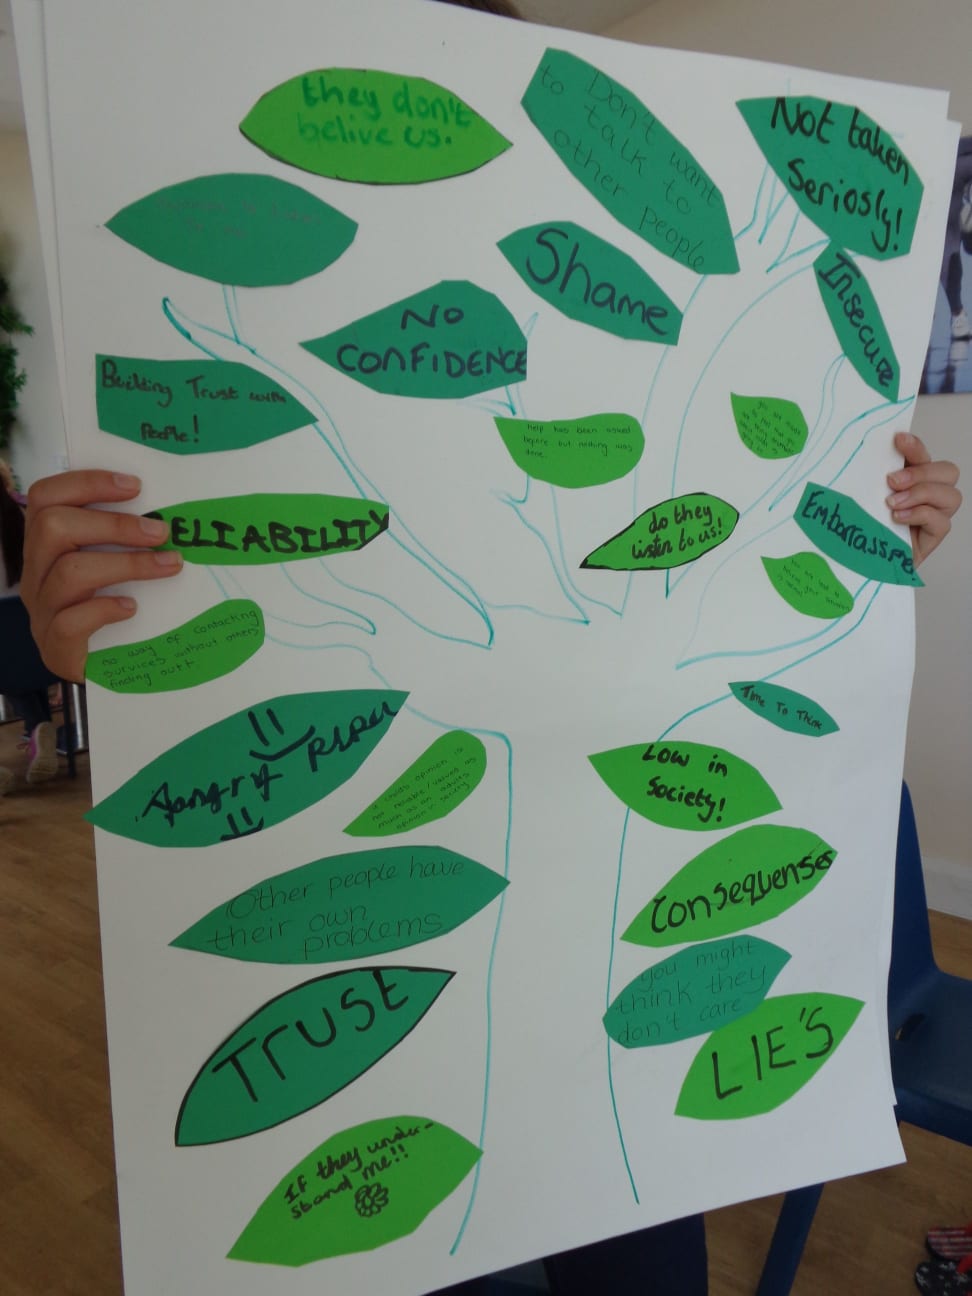 Barriers tree created by young people on the Your Opinion Matters project